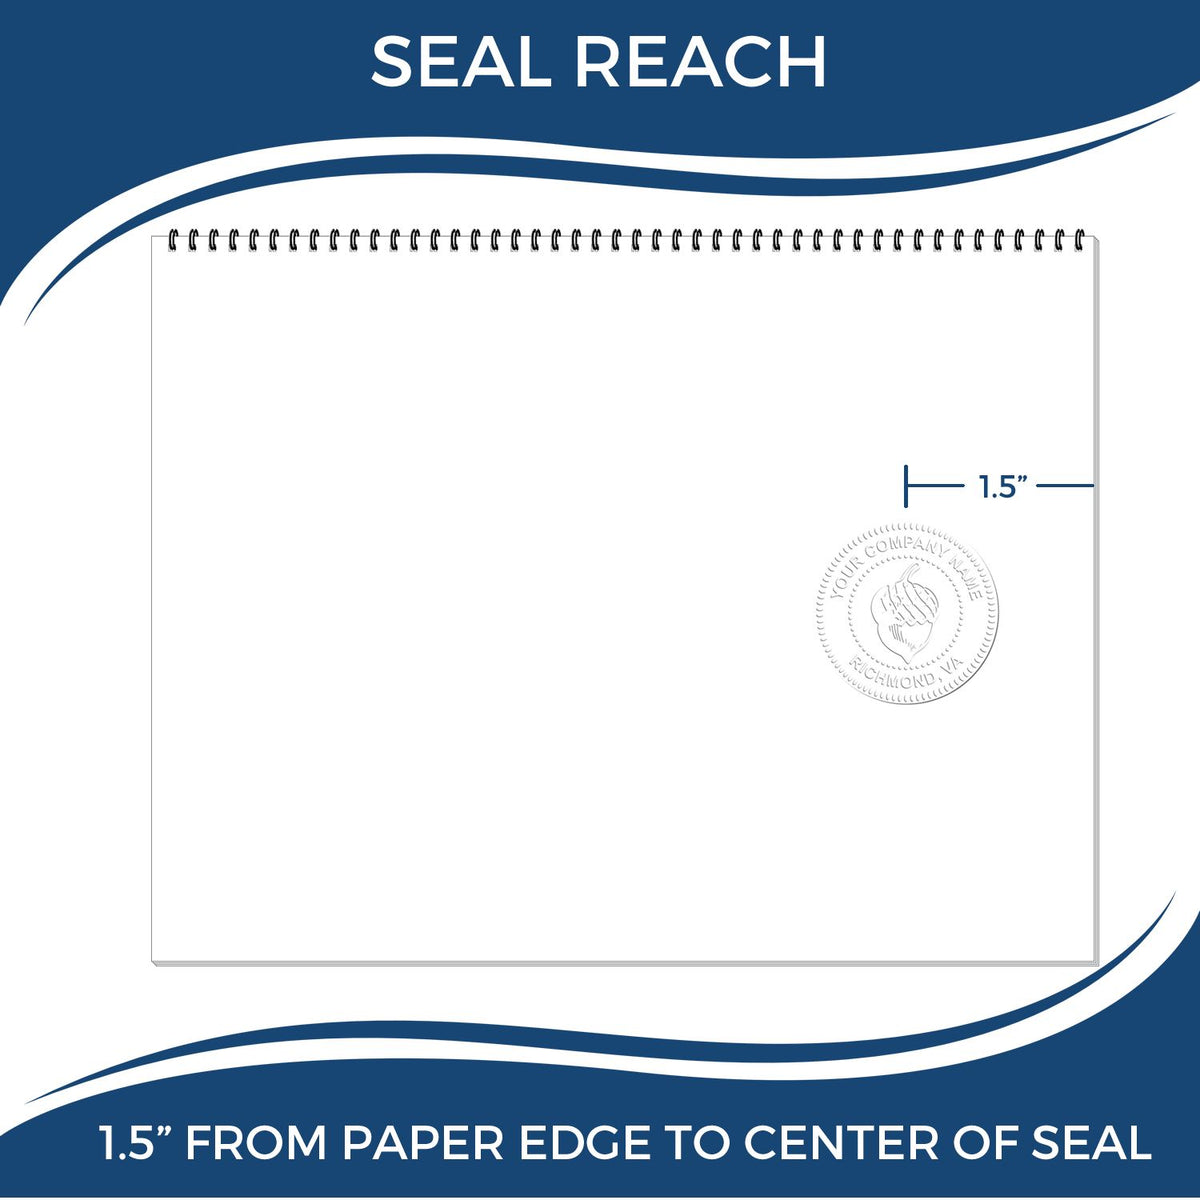 An infographic showing the seal reach which is represented by a ruler and a miniature seal image of the Maine Desk Surveyor Seal Embosser